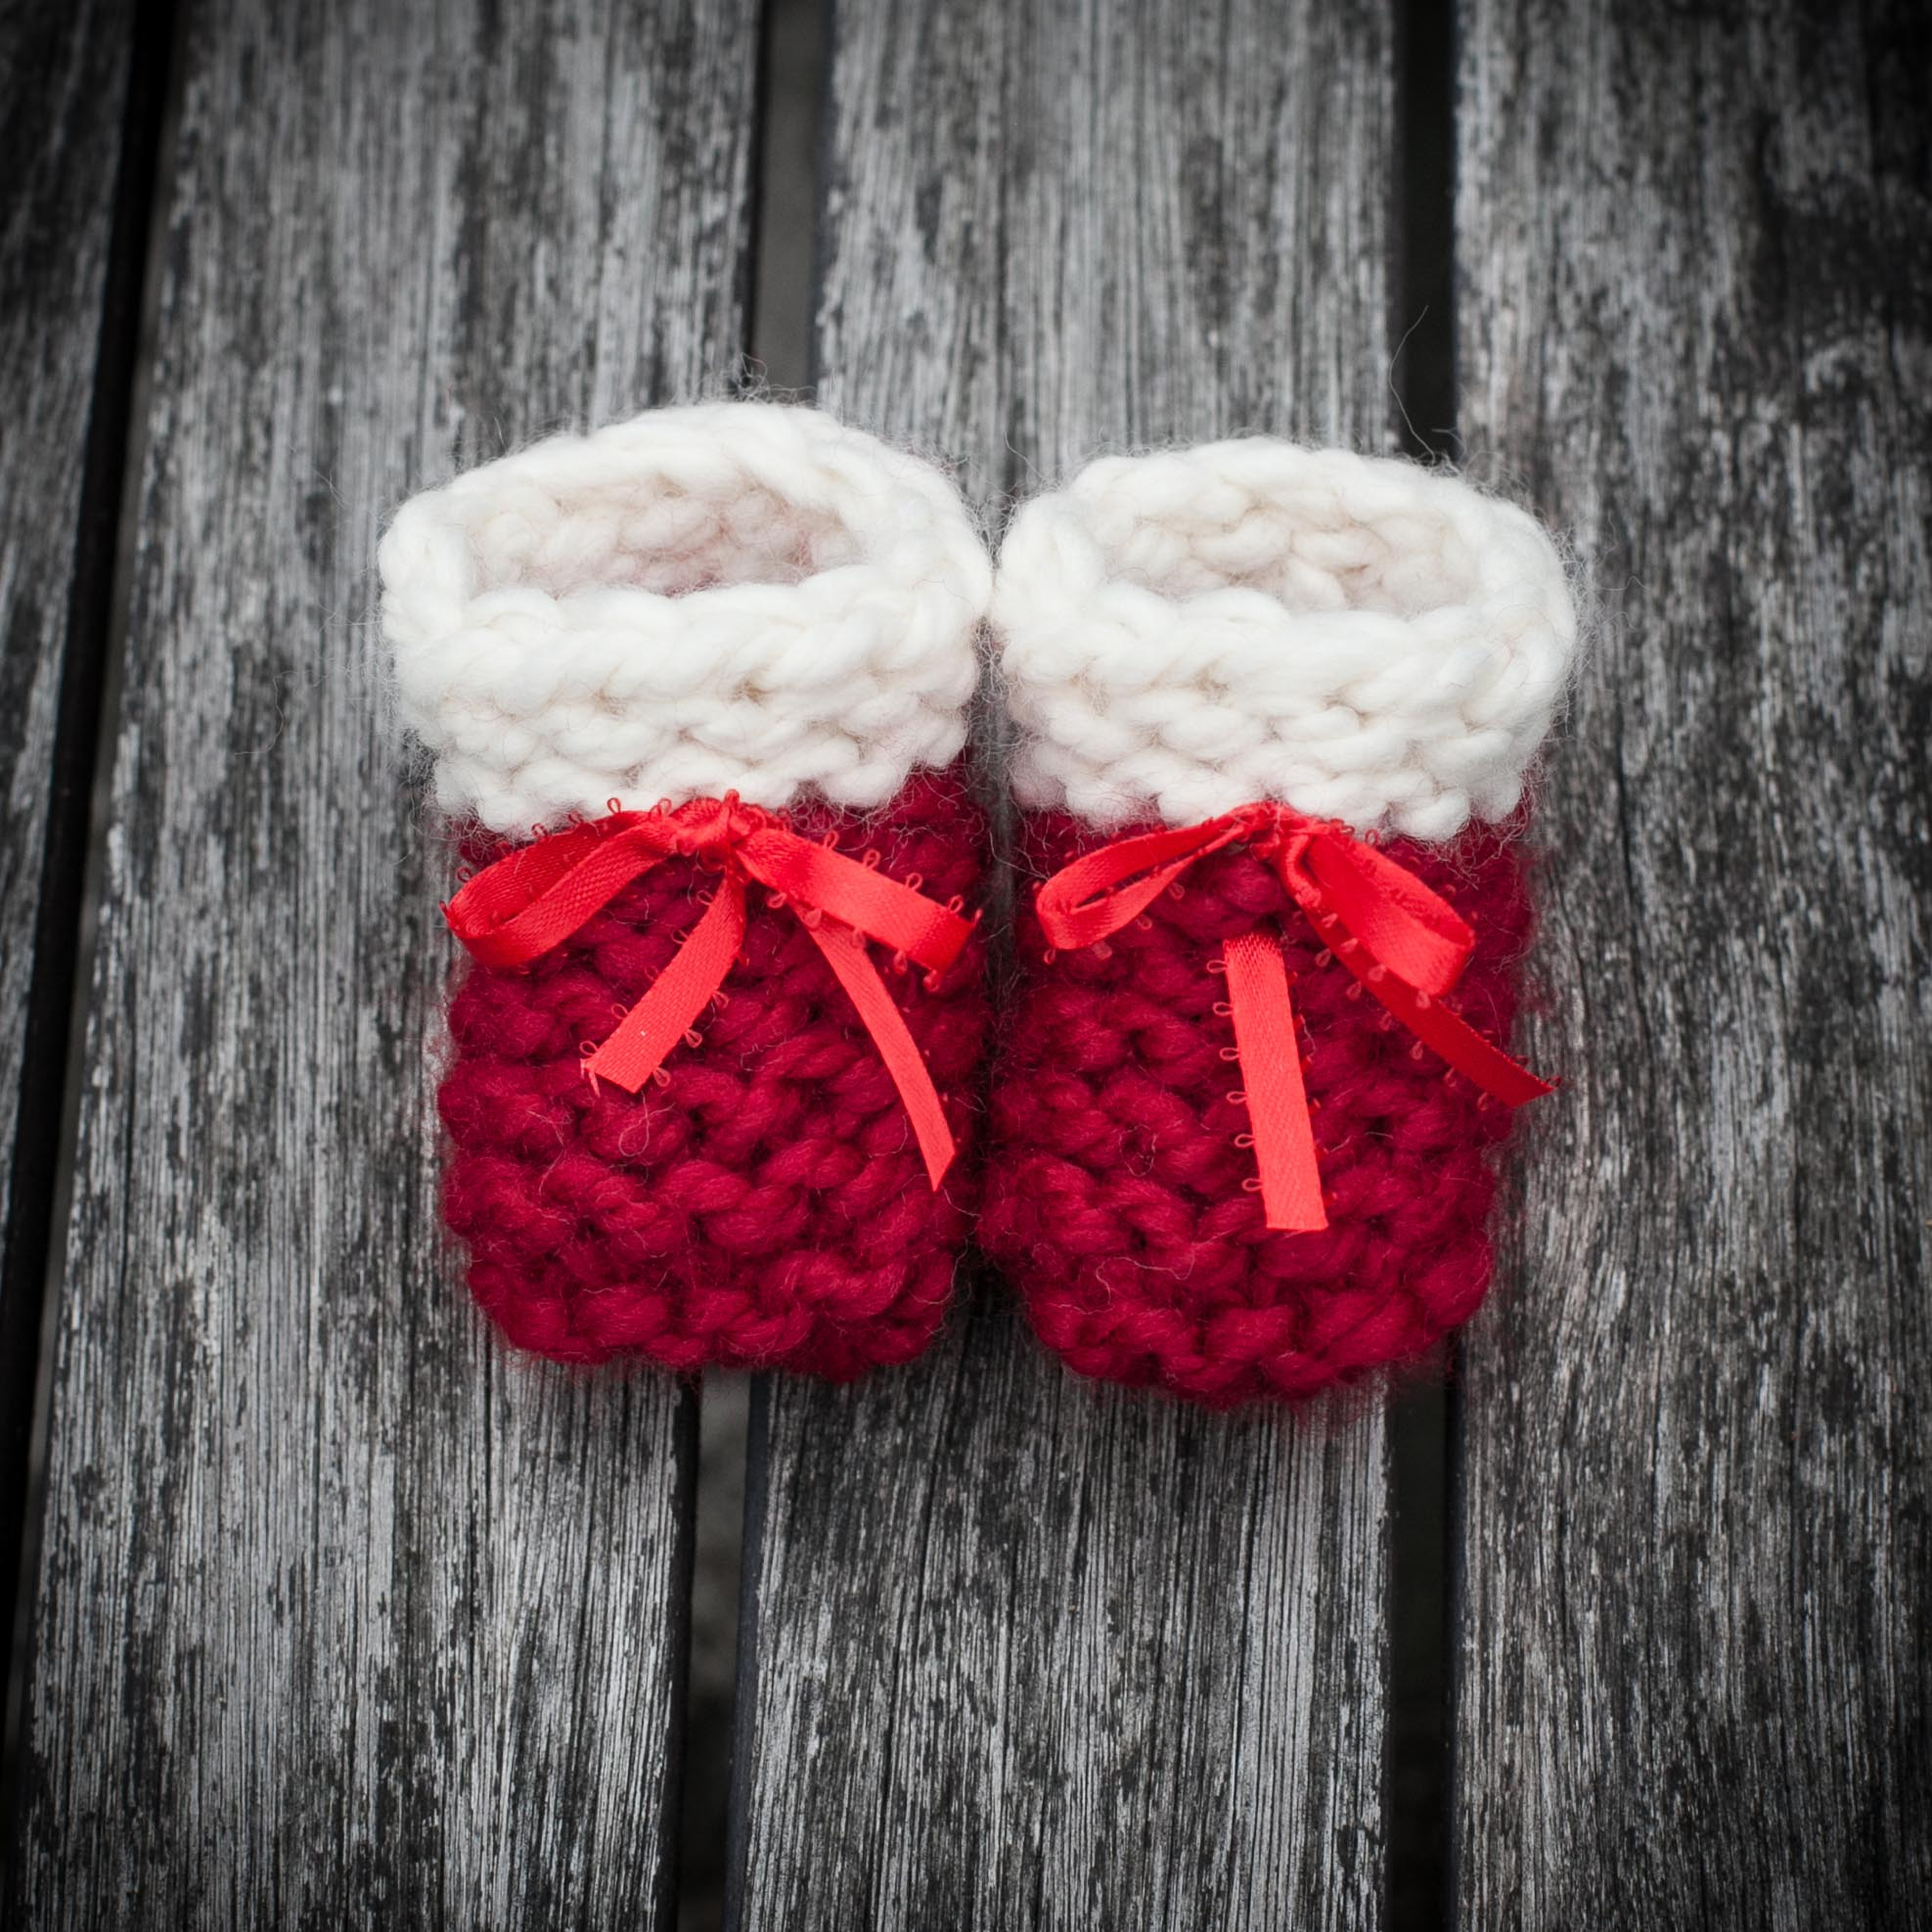 Knitting Patterns For Baby Booties Loom Knit Ba Booties Shoes Pattern Beginner Friendly Garter Stitch Booties 4 Sizes Newborn To 12 Months Pdf Pattern Download